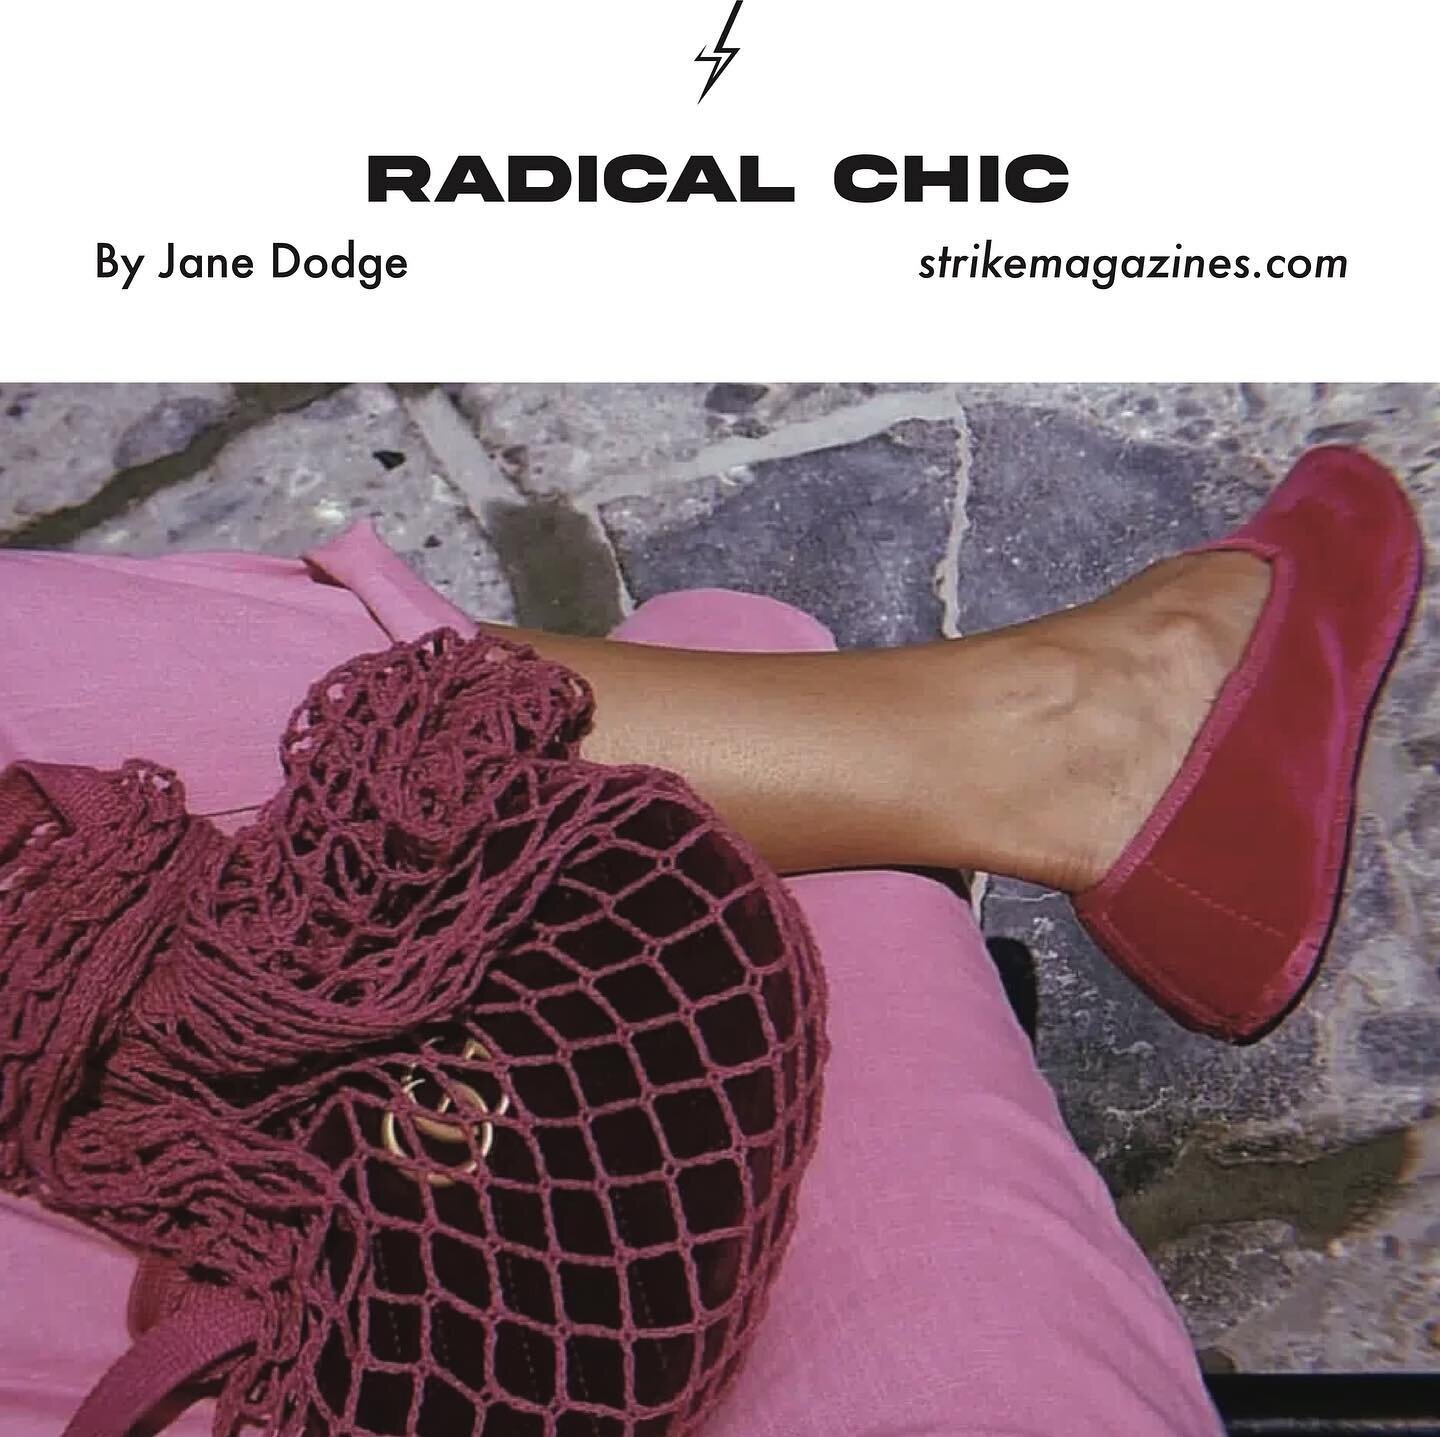 Weekly blogs are back !! On the blog this week is &ldquo;Radical Chic&rdquo; by @janedodge0 and &ldquo;Losing Friends is Not a Bad Thing&rdquo; by @annakatherinea Link in bio! ⚡️